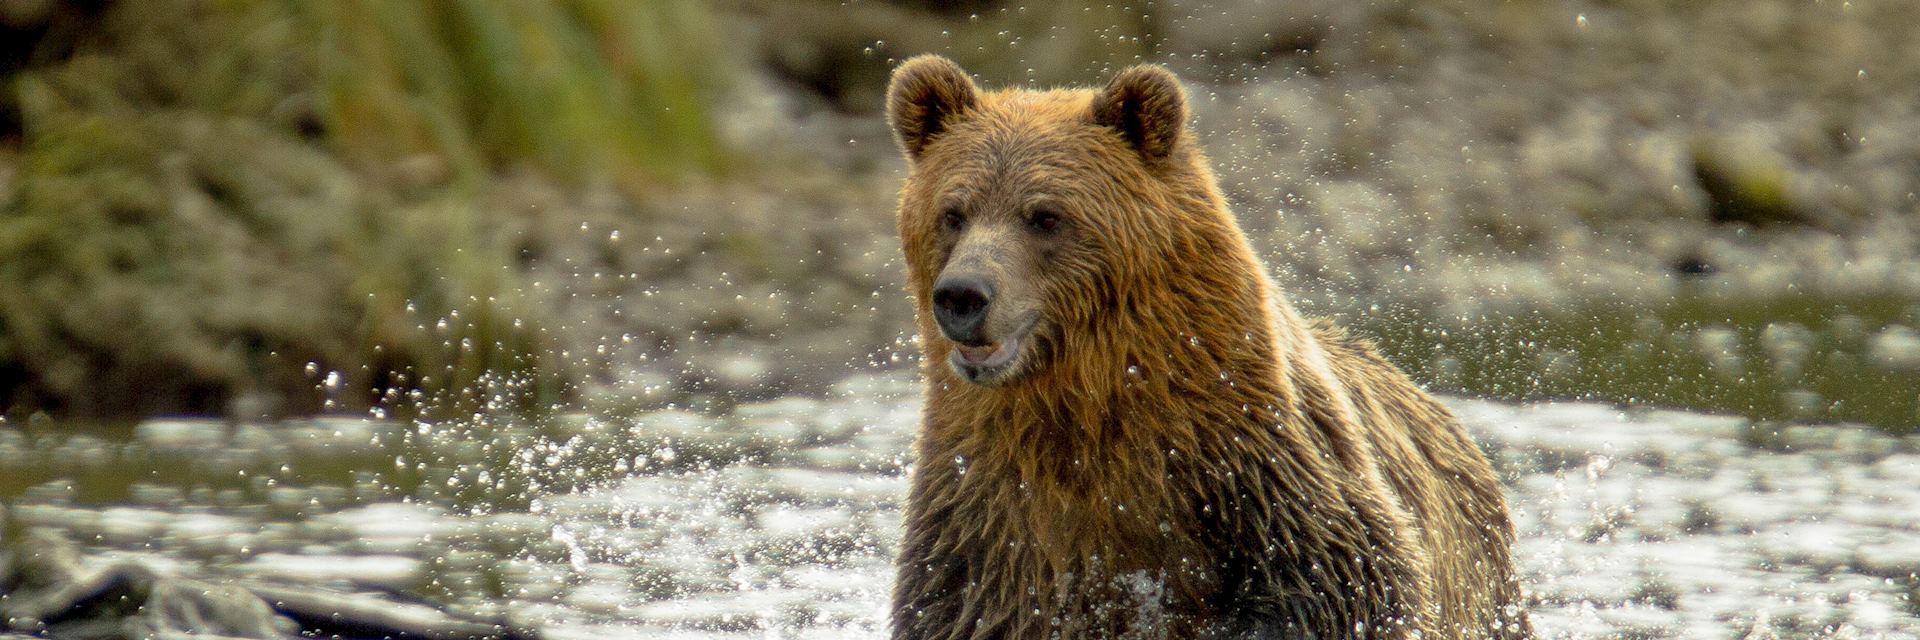 Grizzly bear at Knight Inlet, British Columbia